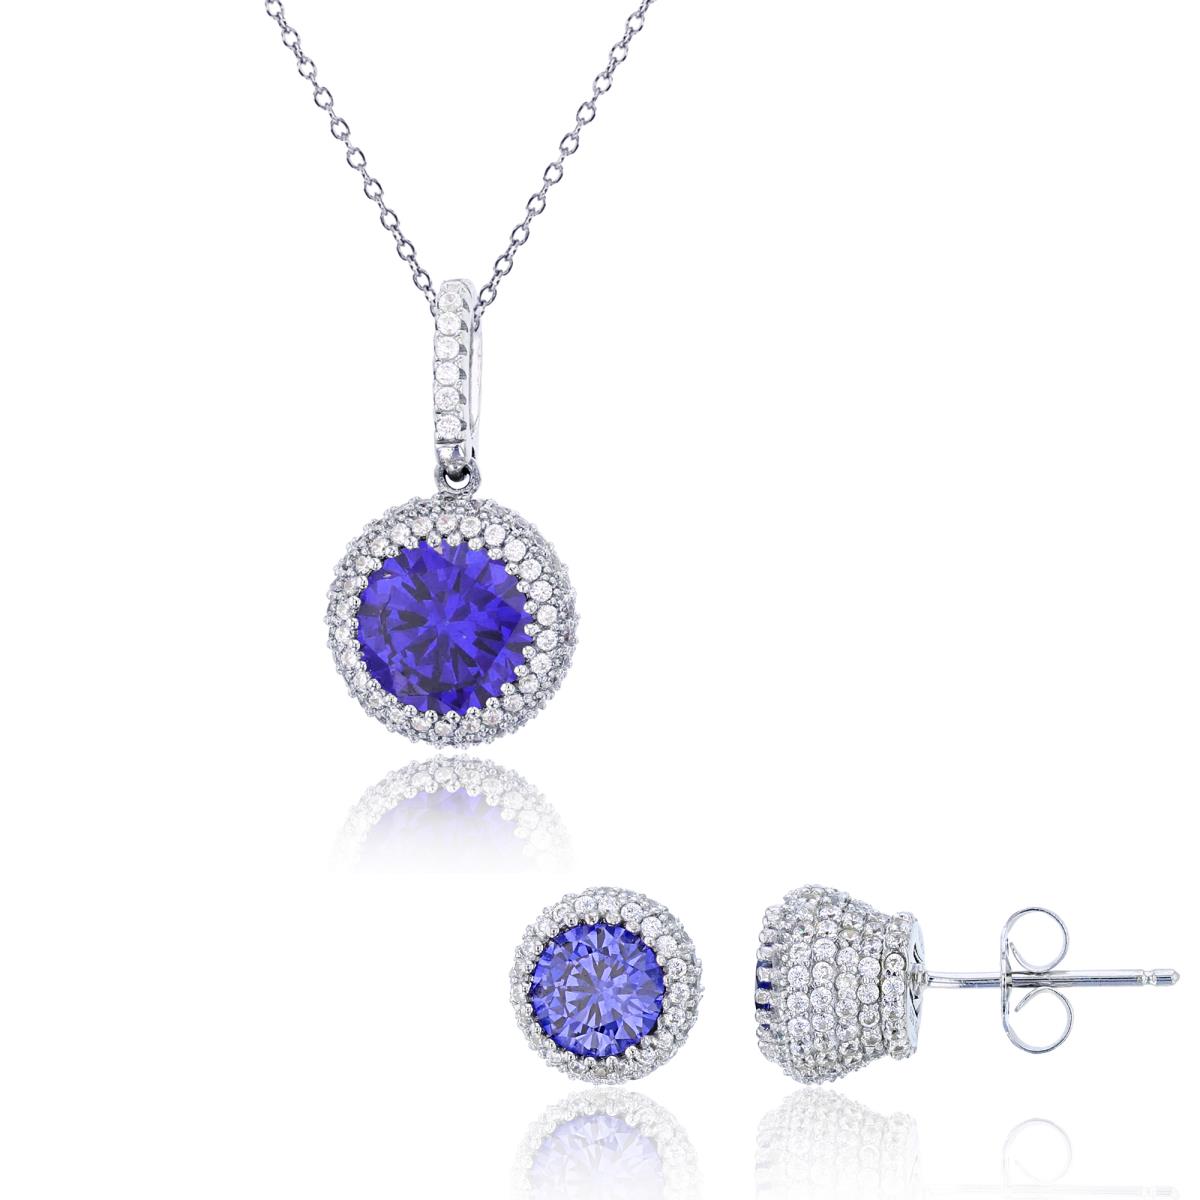 Sterling Silver Rhodium 8mm Rd Tanzanite & White CZ Micropave 18" Necklace & Stud Earrings Set